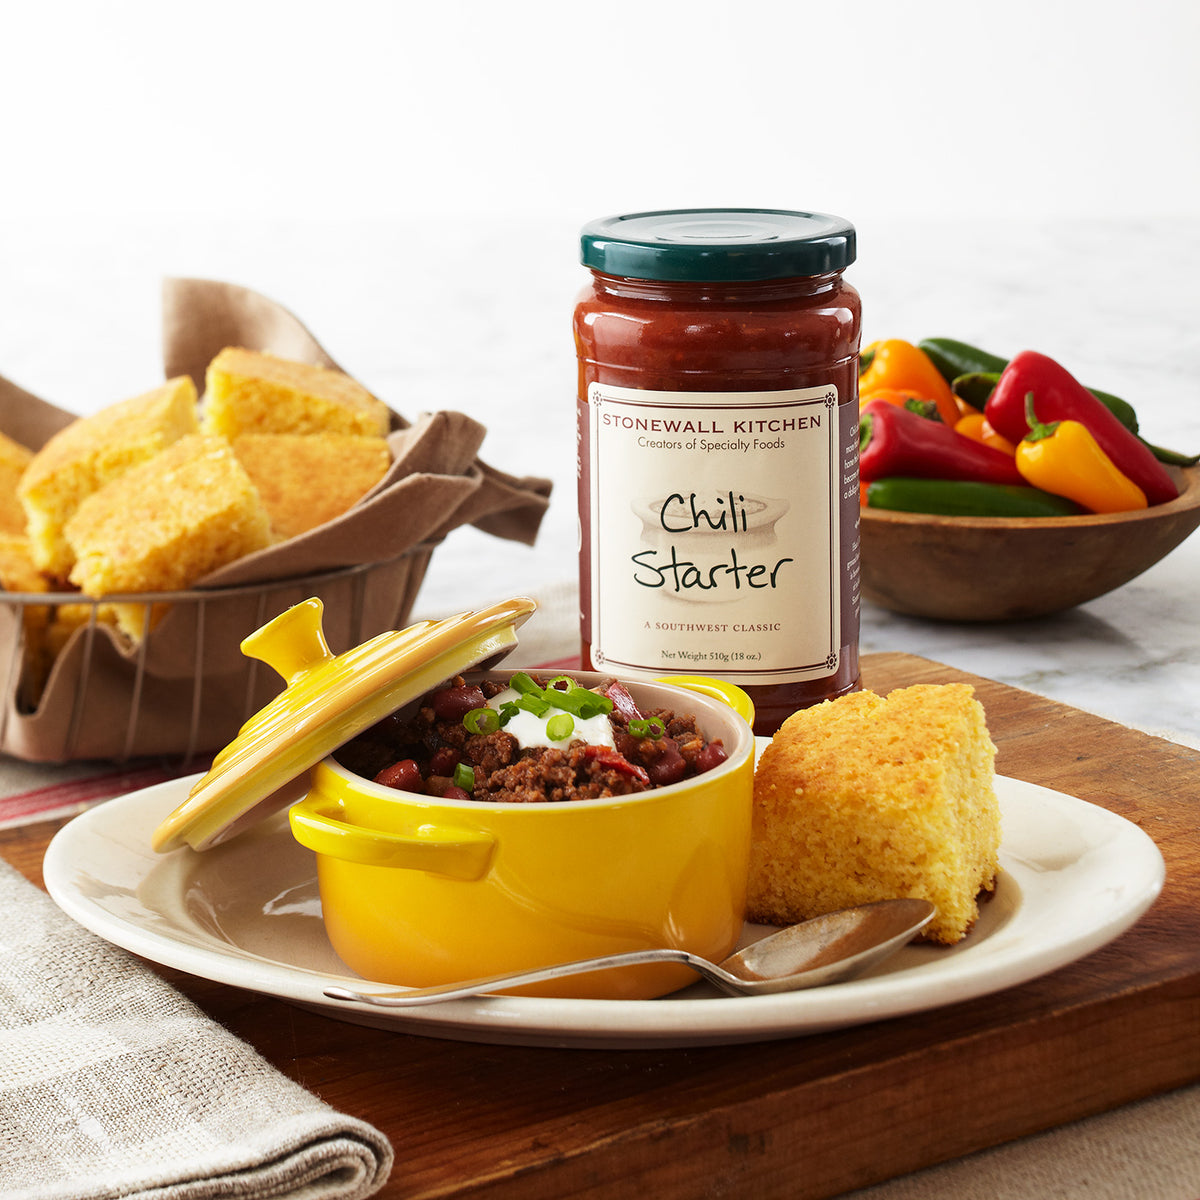 chili in a yellow crock with cornbread in a basket and a jar of Stonewall Kitchen Chili Starter